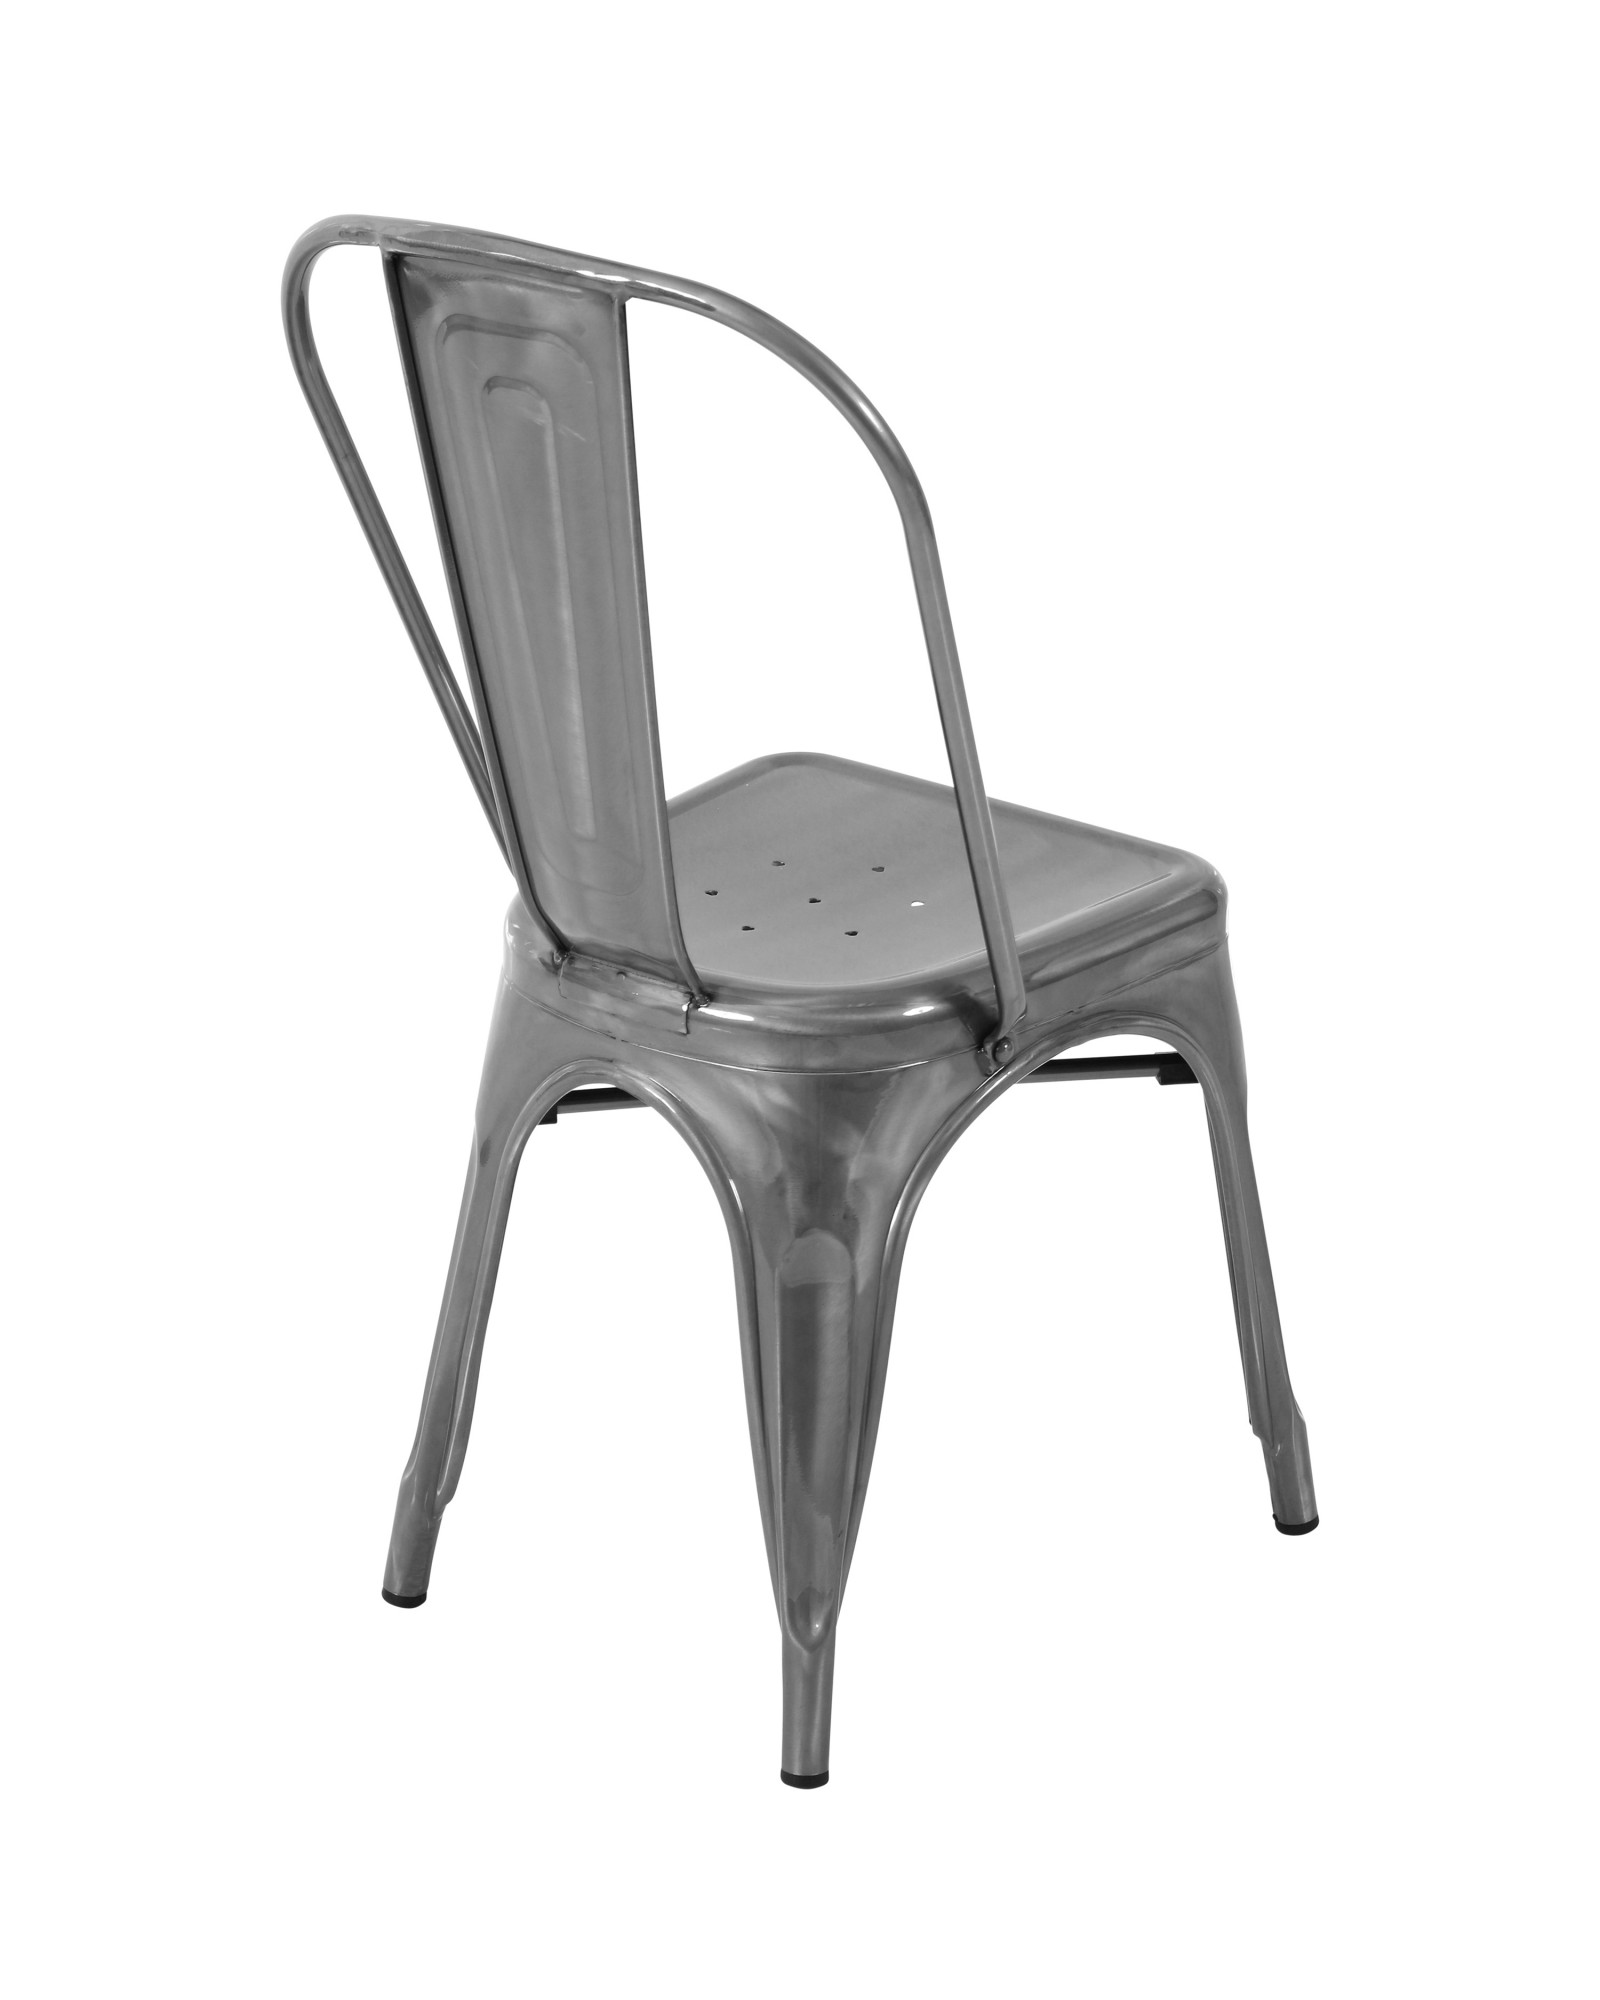 Oregon Industrial Stackable Dining Chair in Brushed Silver - Set of 2